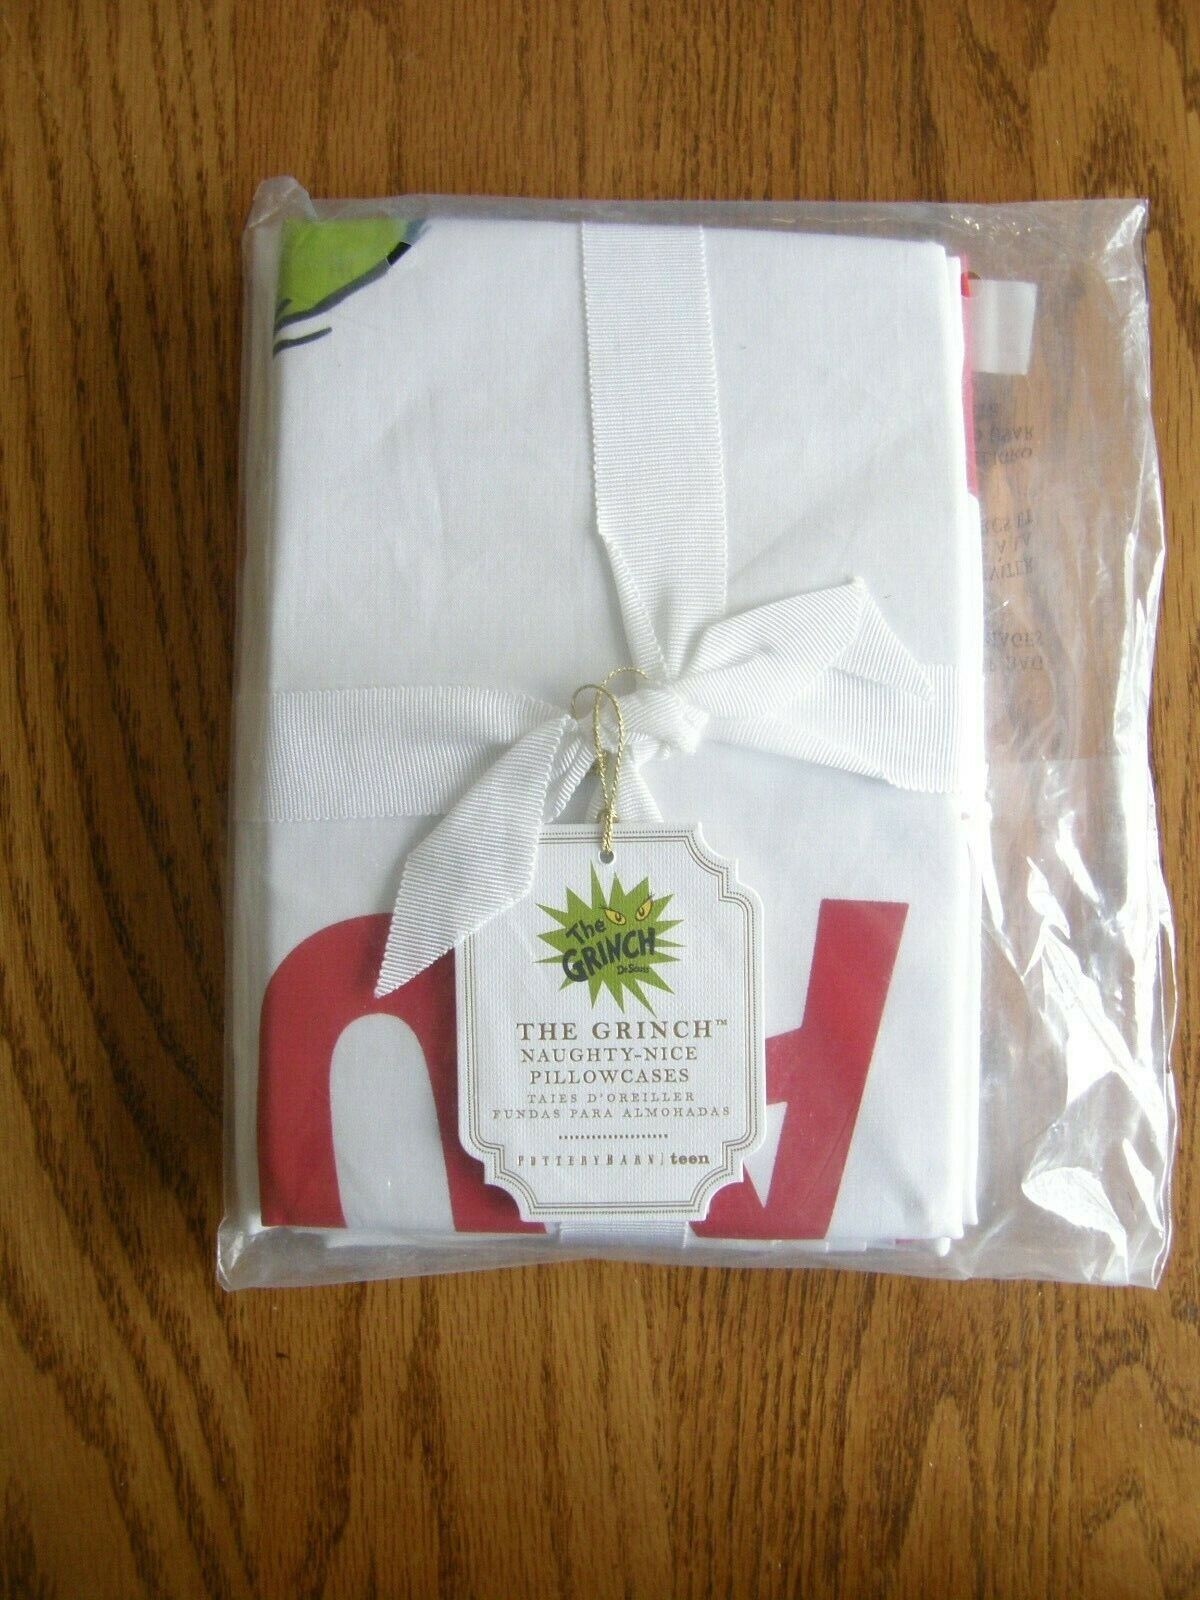 Set 2: Pottery Barn The Grinch & Max The Dog-naughty Or Nice Pillowcases - New